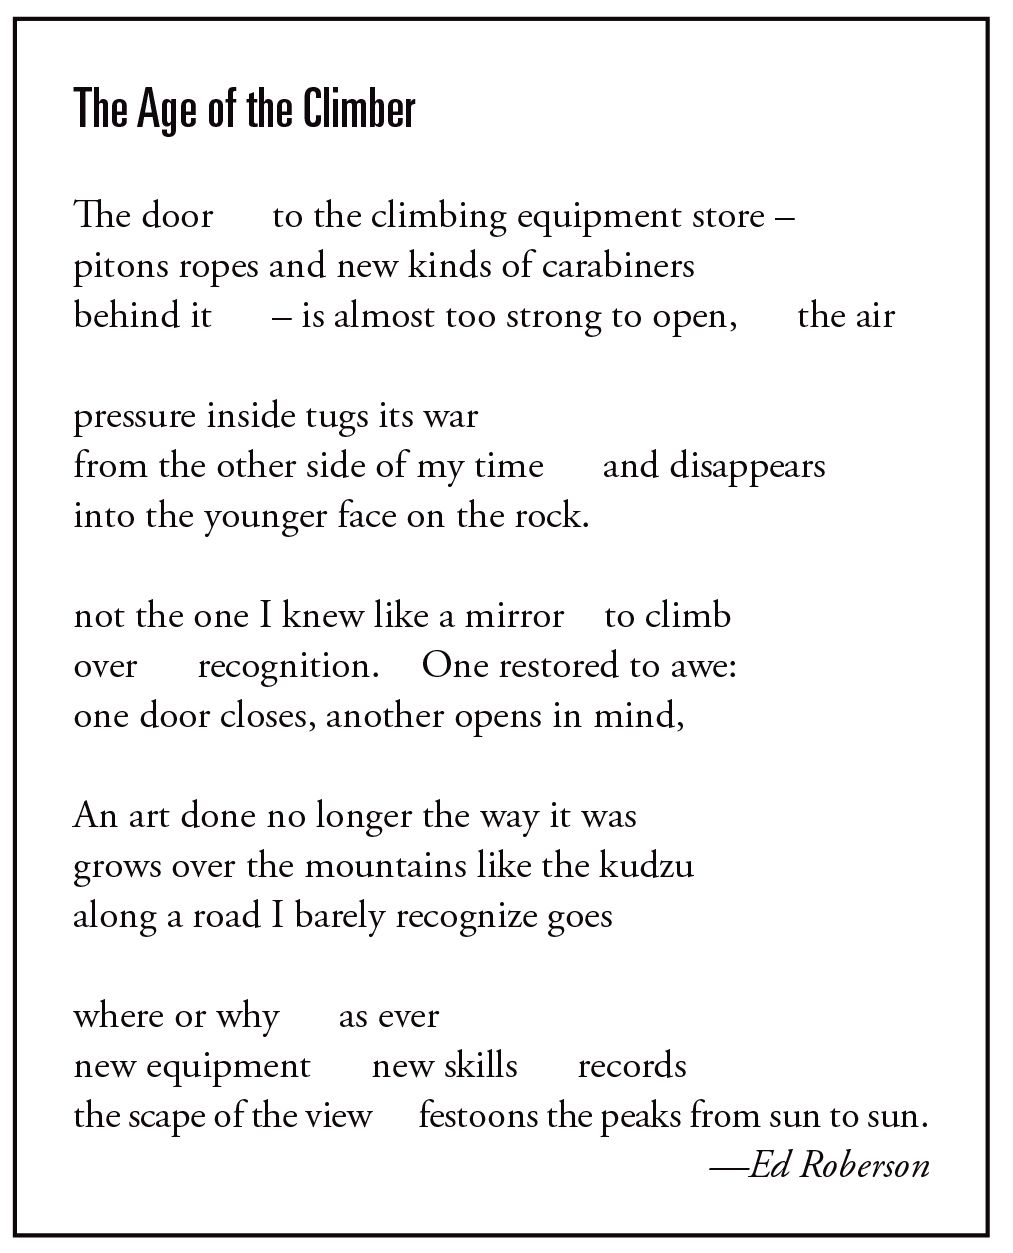 This poem first appeared in Alpinist 67 (Autumn 2019).